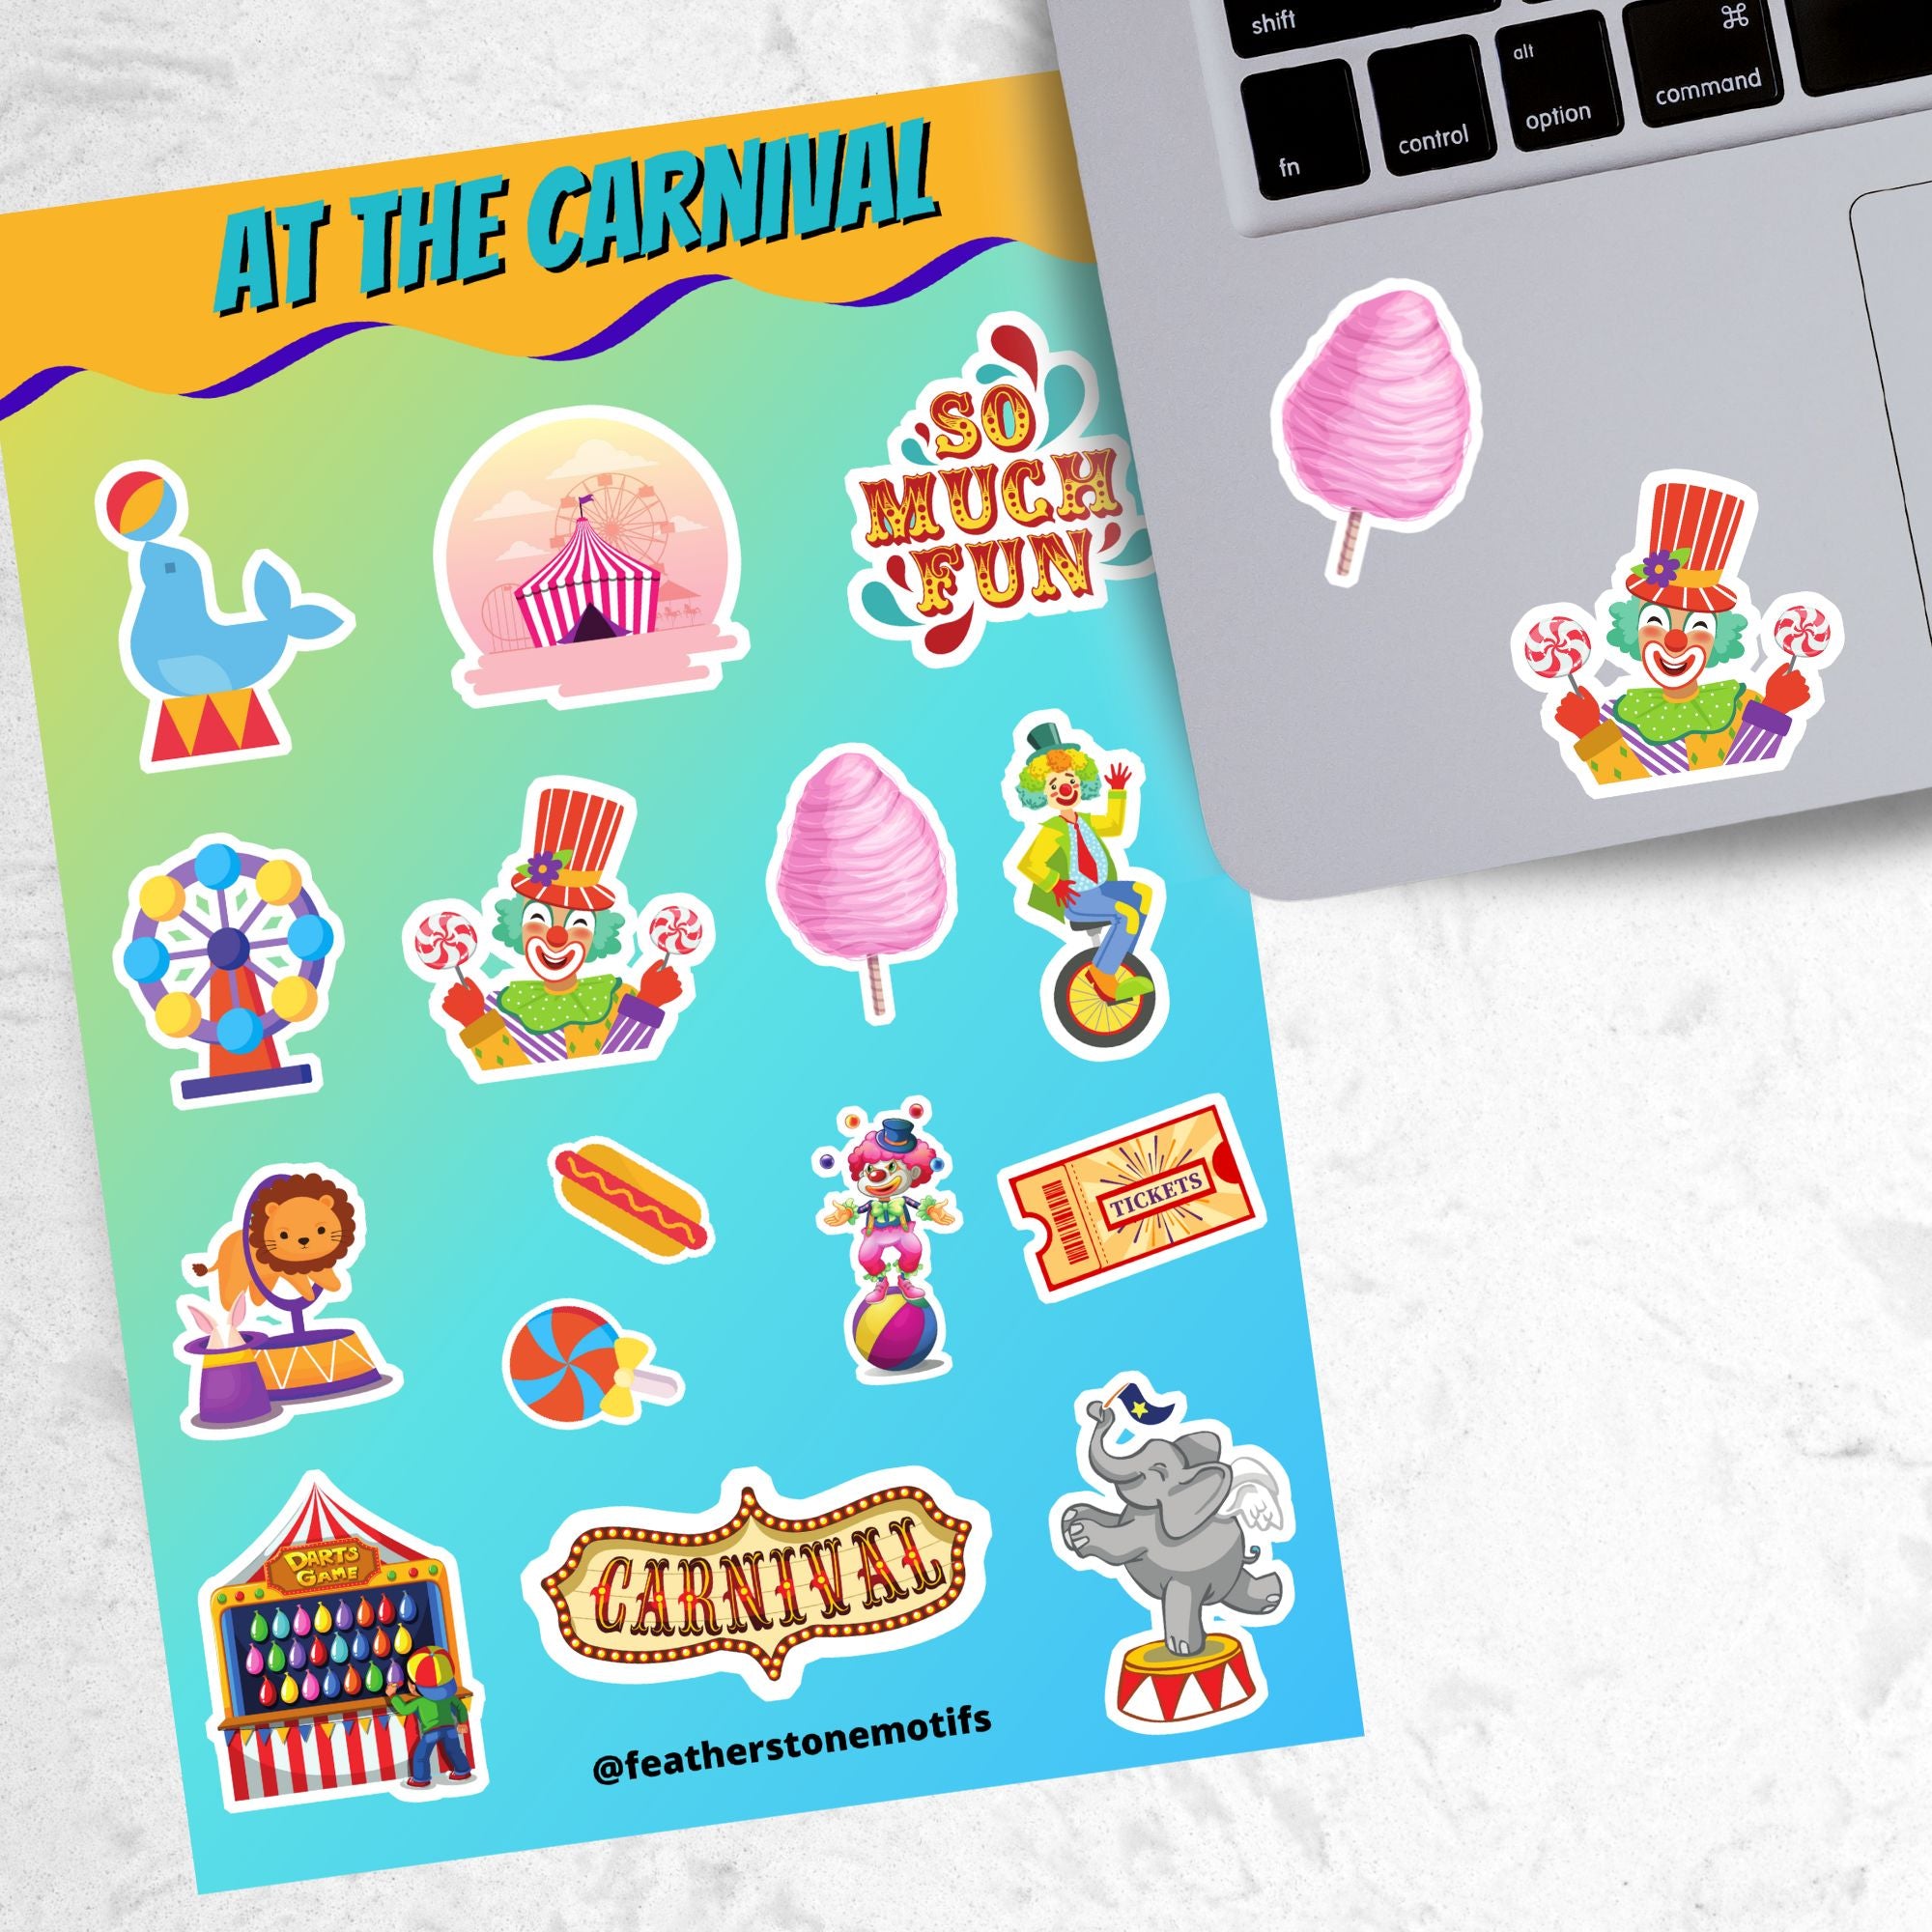 Who doesn't love going to the carnival? This sheet has stickers showing the big top, clowns, animals, and of course your favorite foods like hotdogs and cotton candy.  This is an image of a laptop with stickers on it.